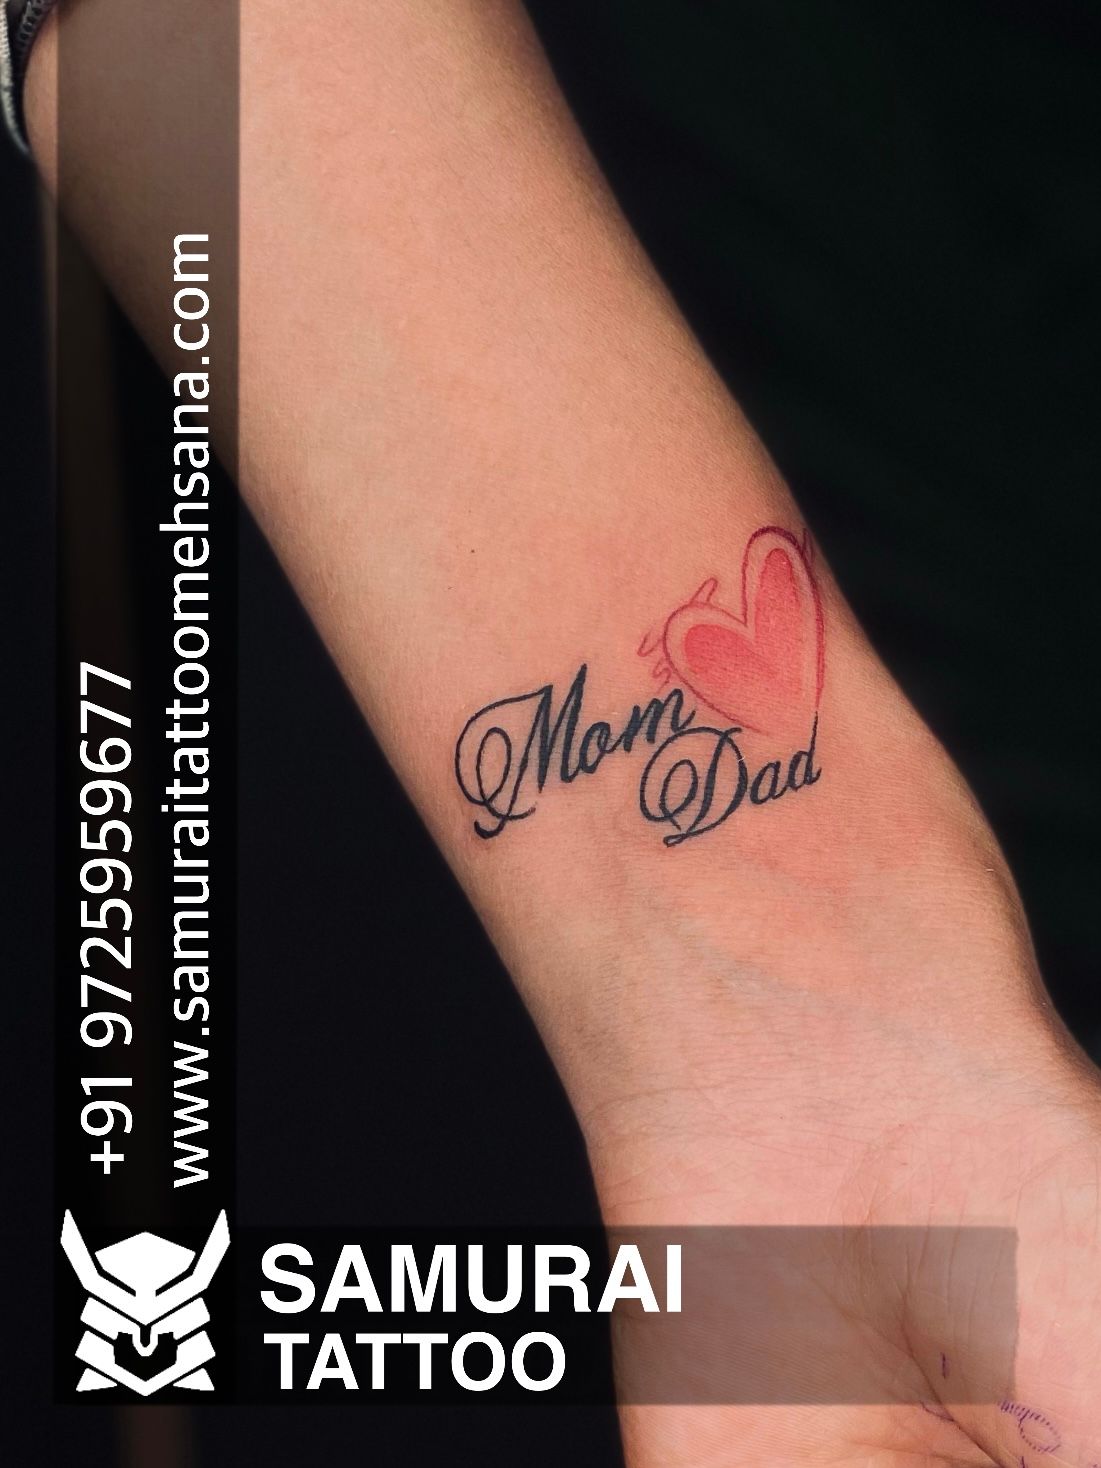 Latest 50 Mom Dad Tattoo Designs With Meaning for Men and Women - Tips and  Beauty | Mom dad tattoo designs, Mom dad tattoos, Dad tattoos